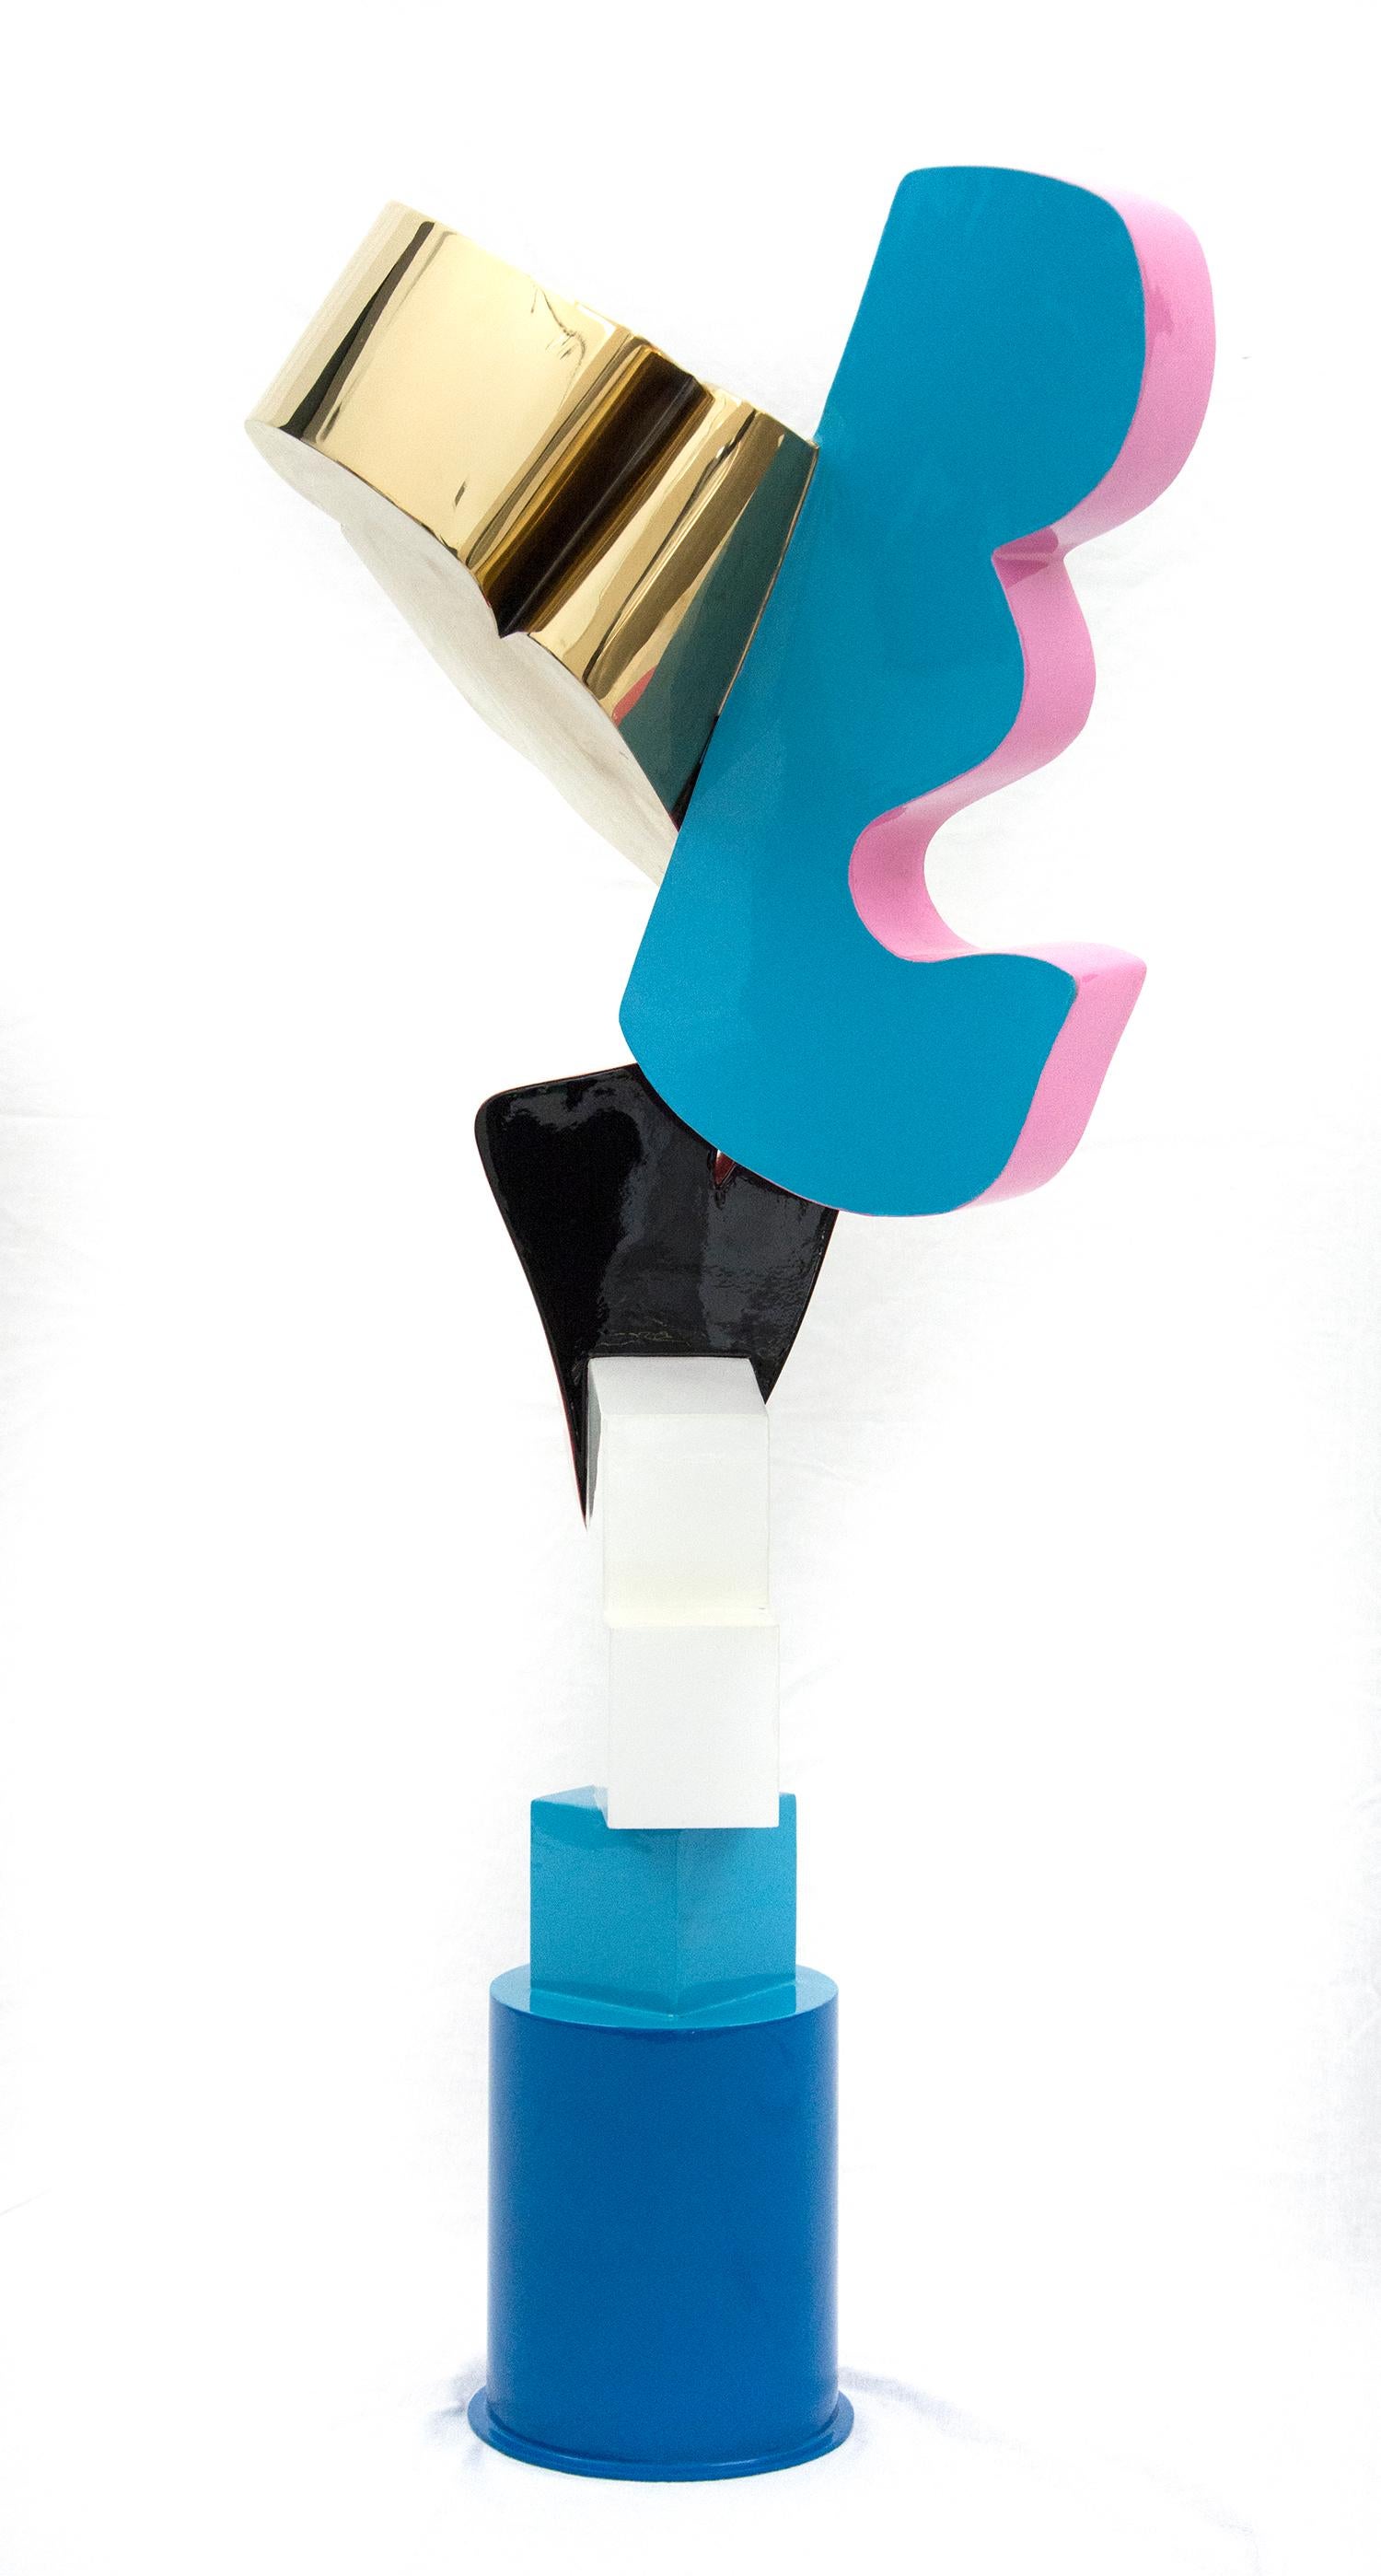 Gold Top - blue, pink, red, post-pop, abstract, gold plated, steel sculpture - Sculpture by Viktor Mitic